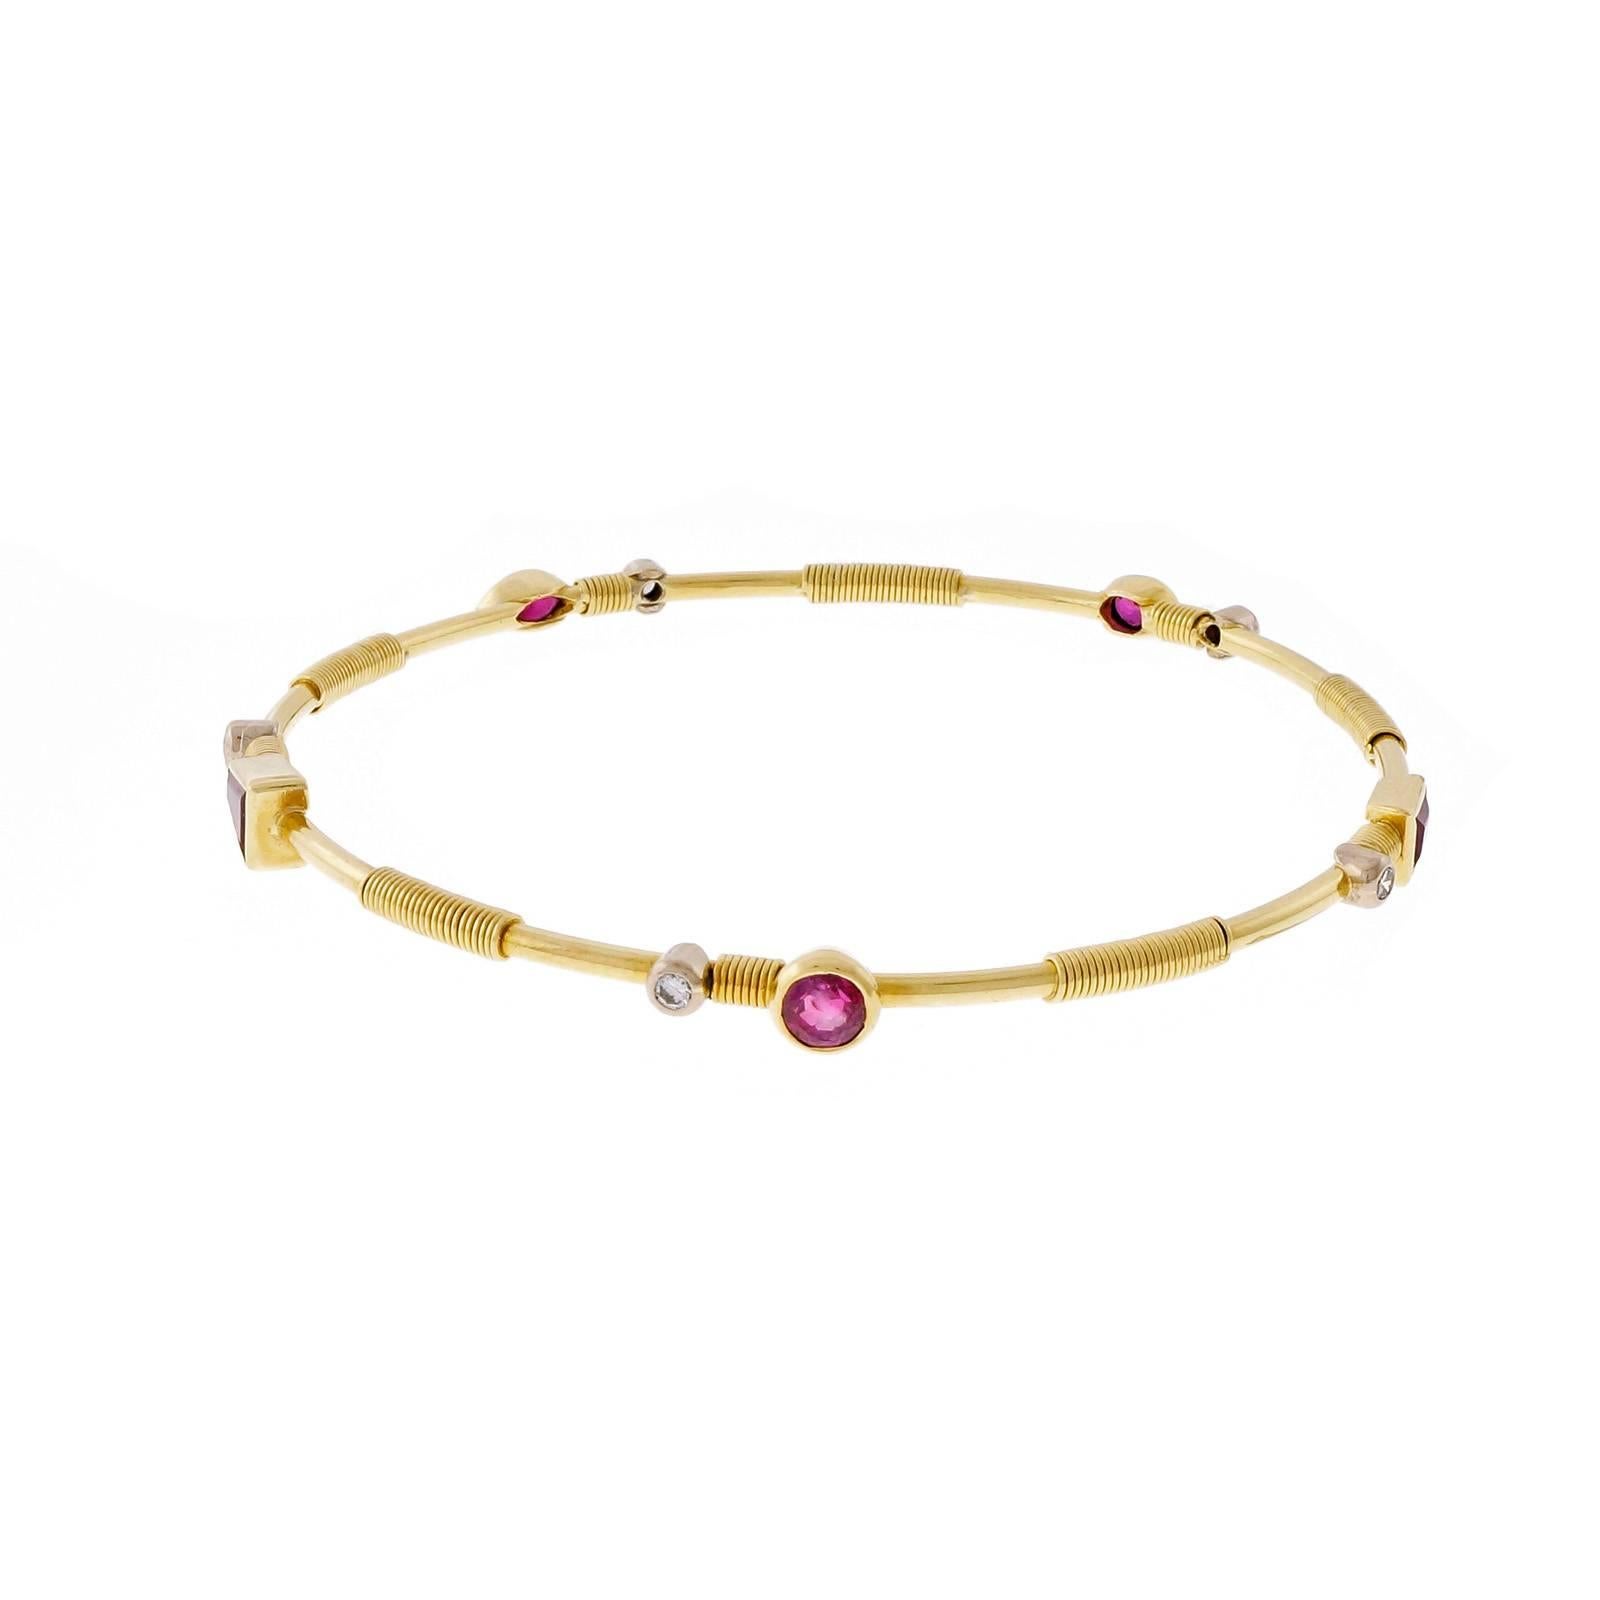 Handmade solid 18k yellow gold slip on bangle bracelet with bright red multi shaped genuine Rubies, diamond and twisted wire accents.

1 round red Ruby, approx. total weight .33cts, SI, 3.95mm
1 Marquise Ruby, approx  .31ct total weight. 5.3 x